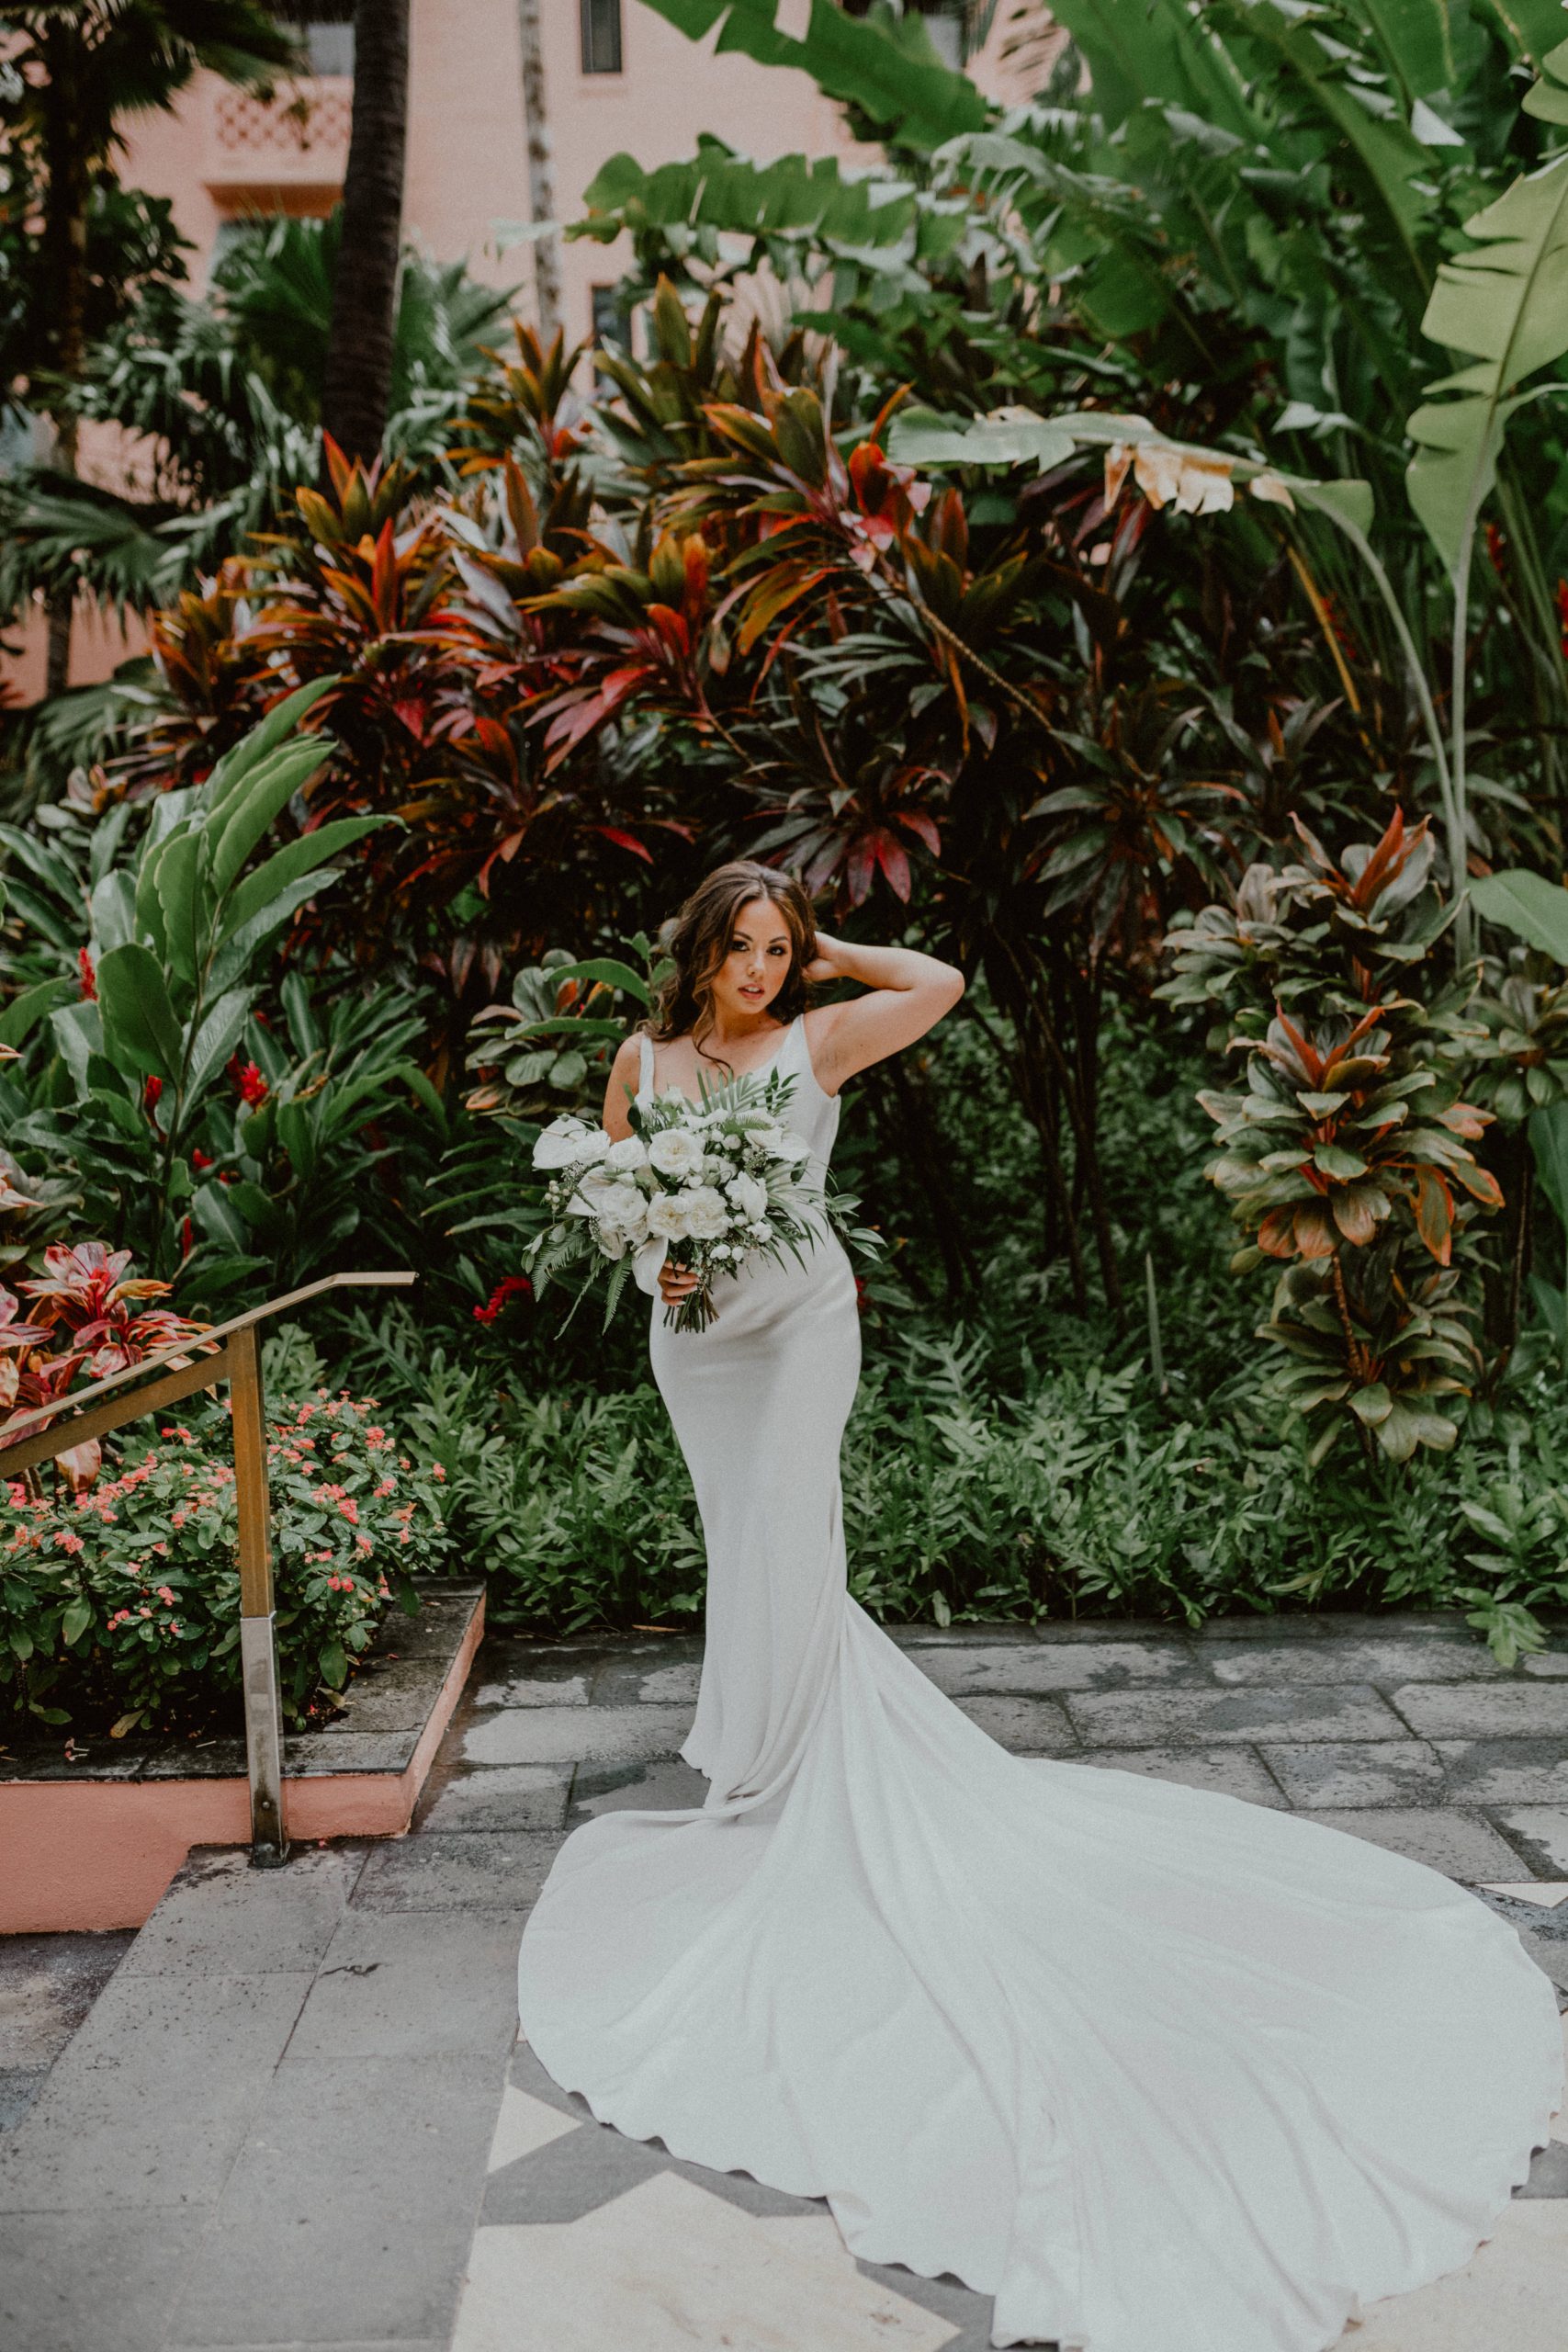 Bride walks down the hotel stairs while carrying white bouquet of flowers with her white silk wedding dress with a long dress and a half up half down bridal hairstyle | Oahu Wedding Photographer, Oahu Elopement Photographer, Destination Wedding Photographer, Destination Elopement Photographer, Newlywed moments ideas, Newlywed Photography inspiration, Hawaii Elopement ideas | chelseaabril.com